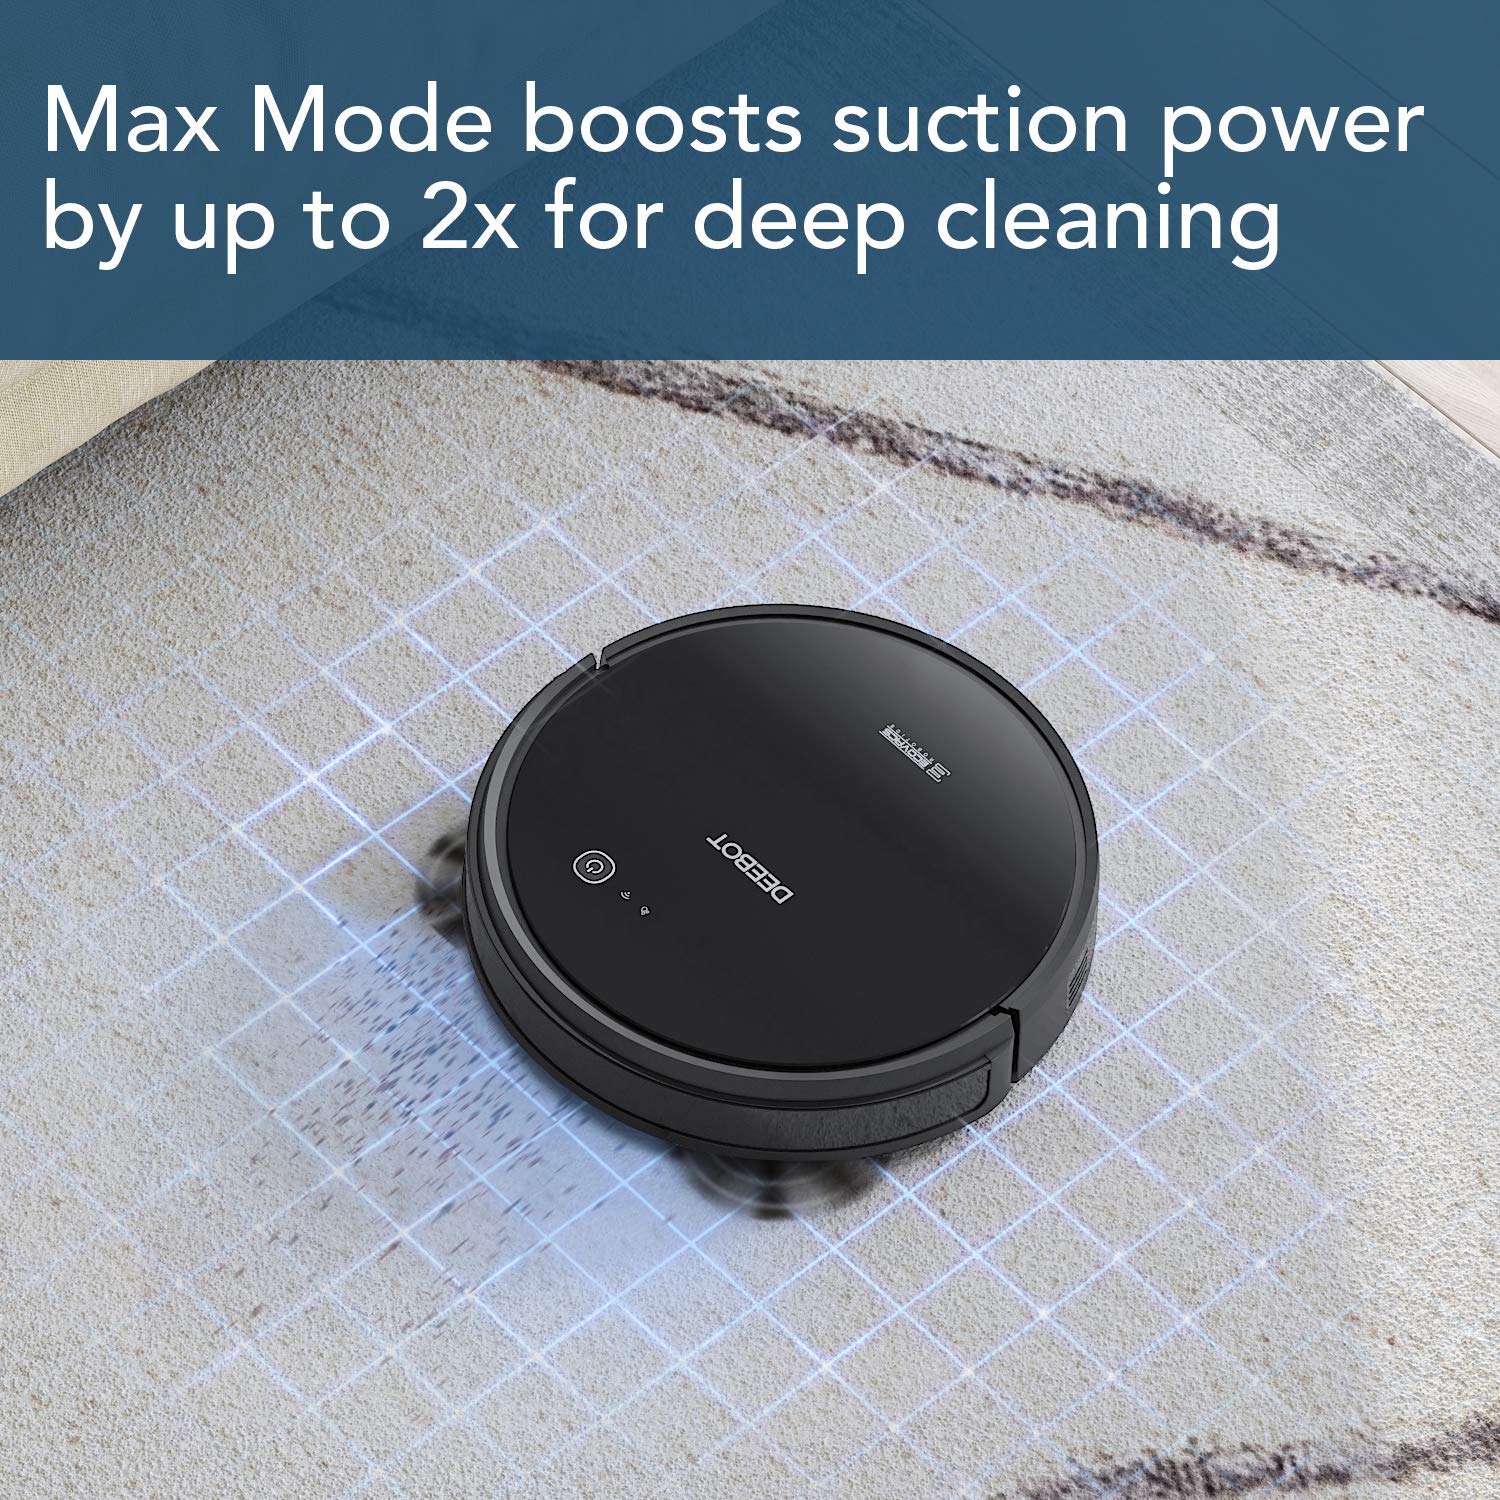 ECOVACS DEEBOT 661 Robot Vacuum Cleaner and Mop, 110 Minute Battery Life - image 5 of 7